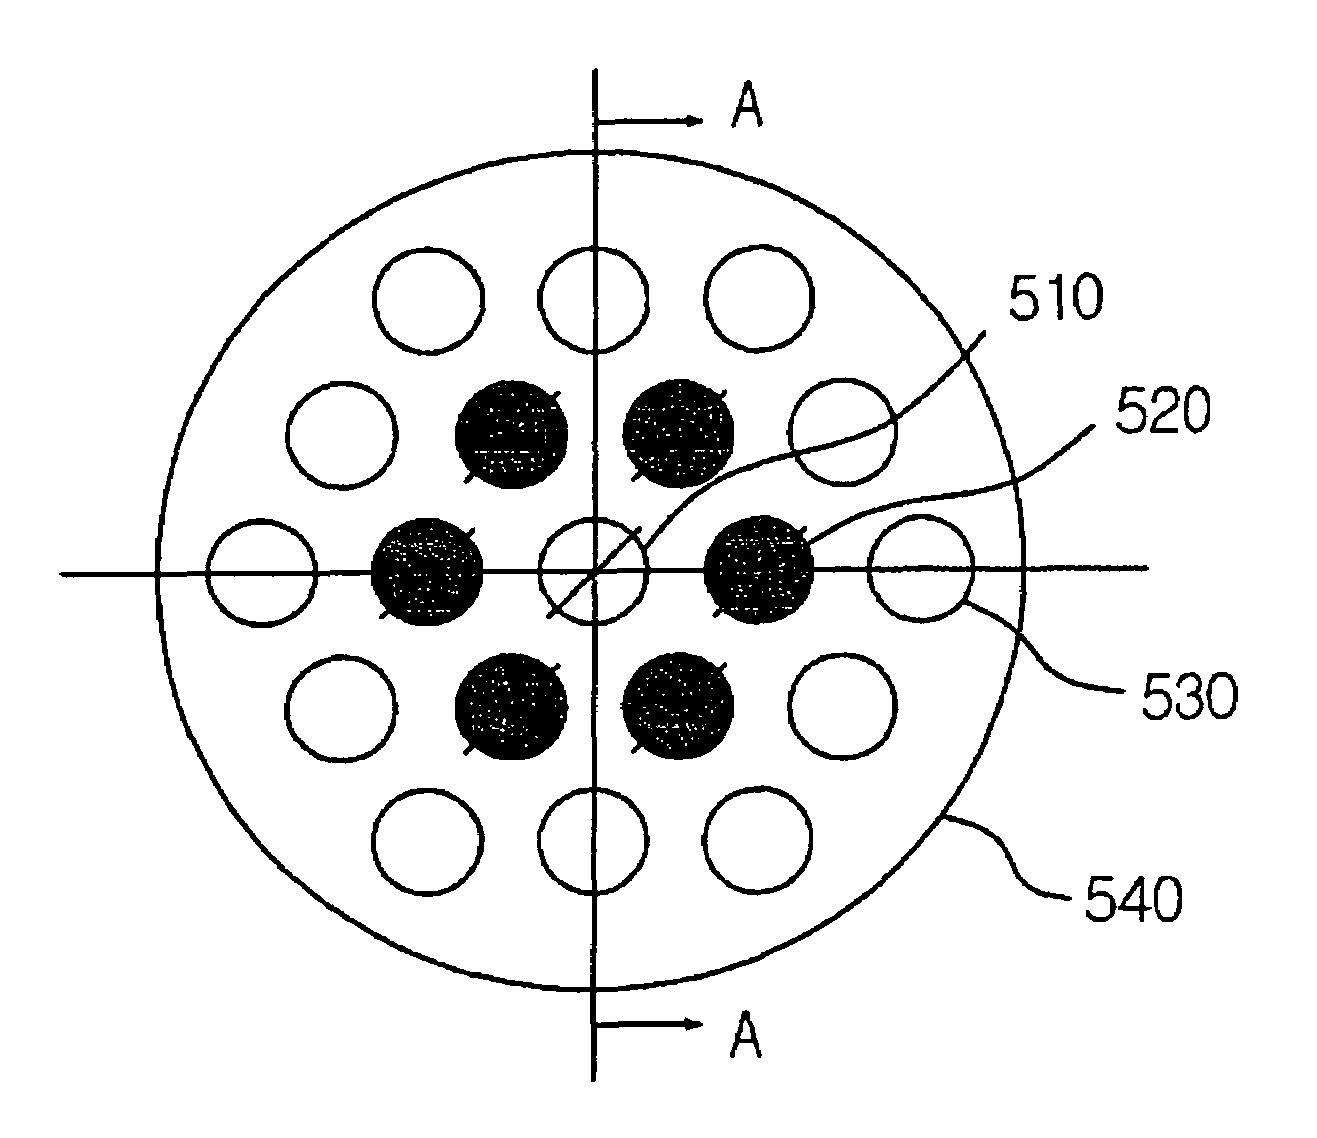 Hexagonal array structure of dielectric rod to shape flat-topped element pattern